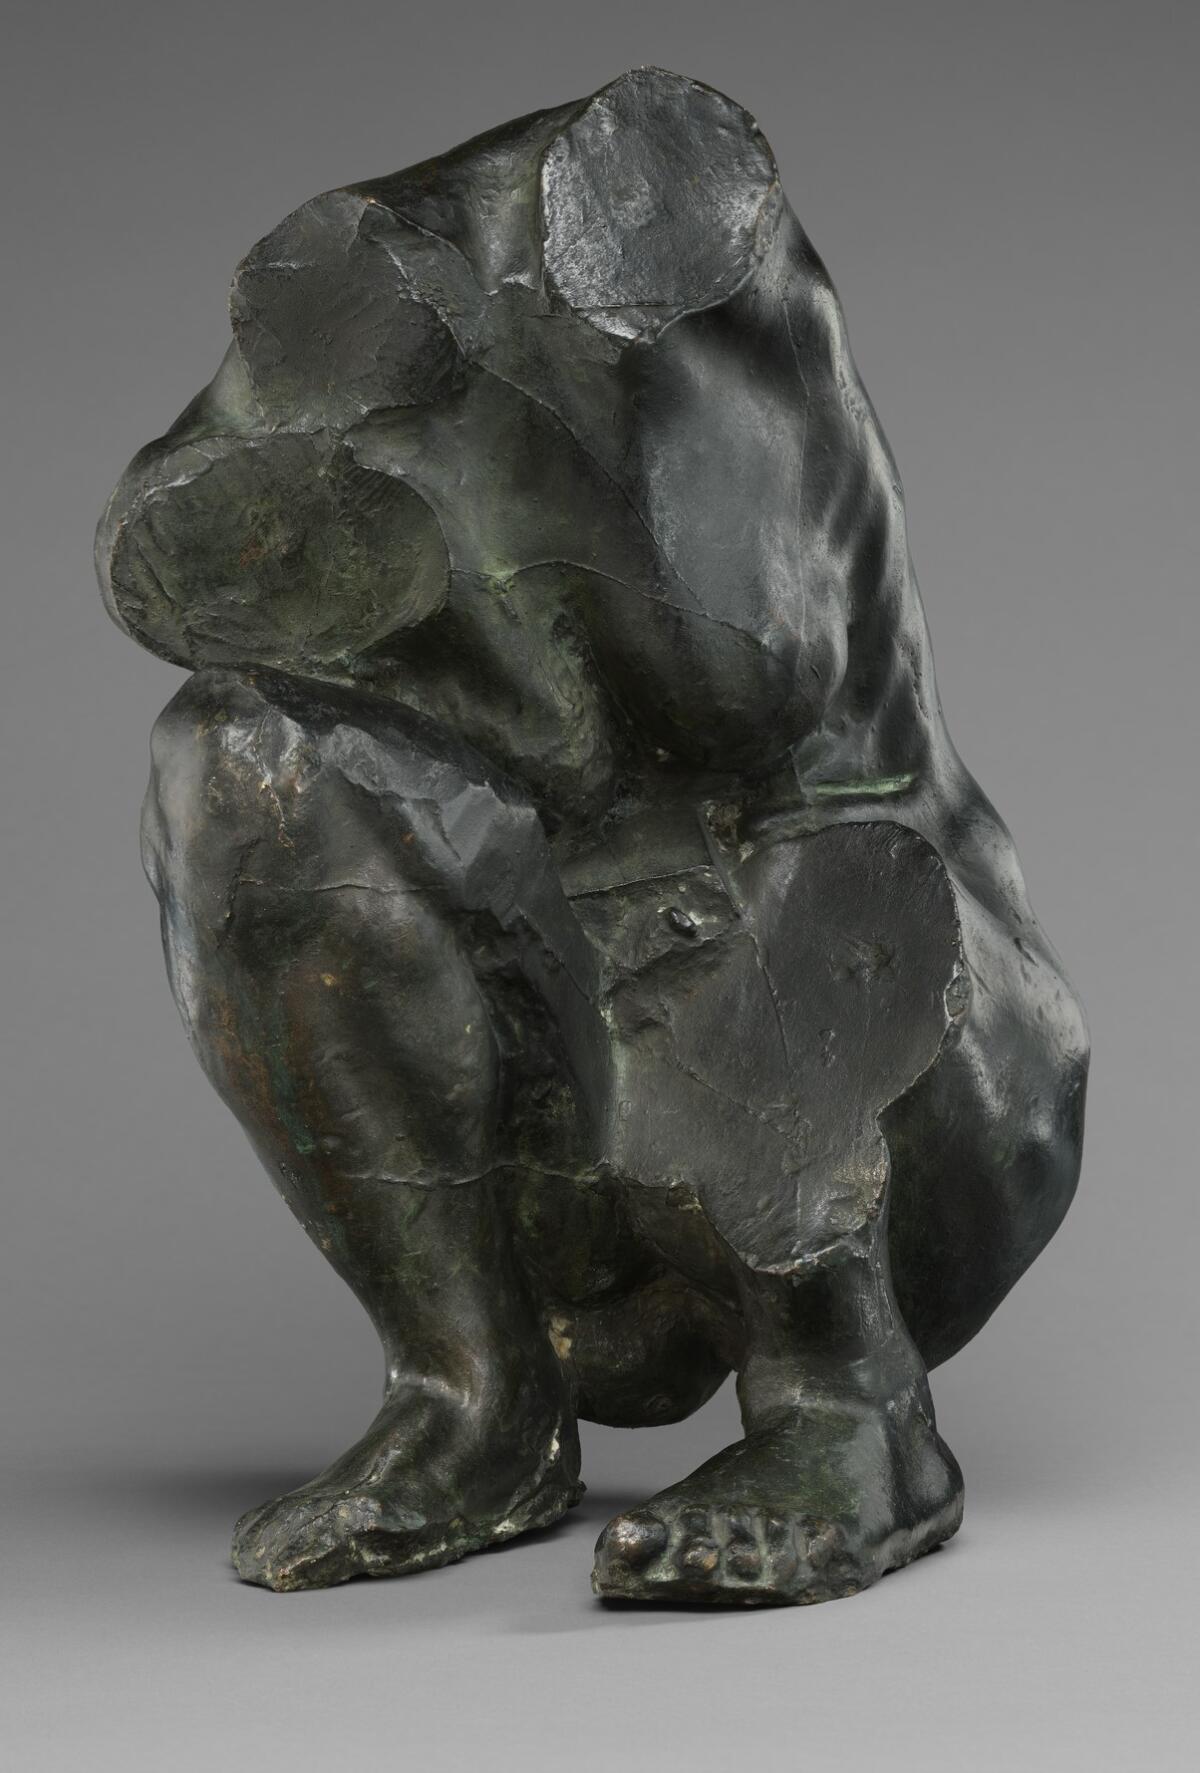 Camille Claudel, "Torso of a Crouching Woman," modeled circa 1884-85, bronze cast about 1913